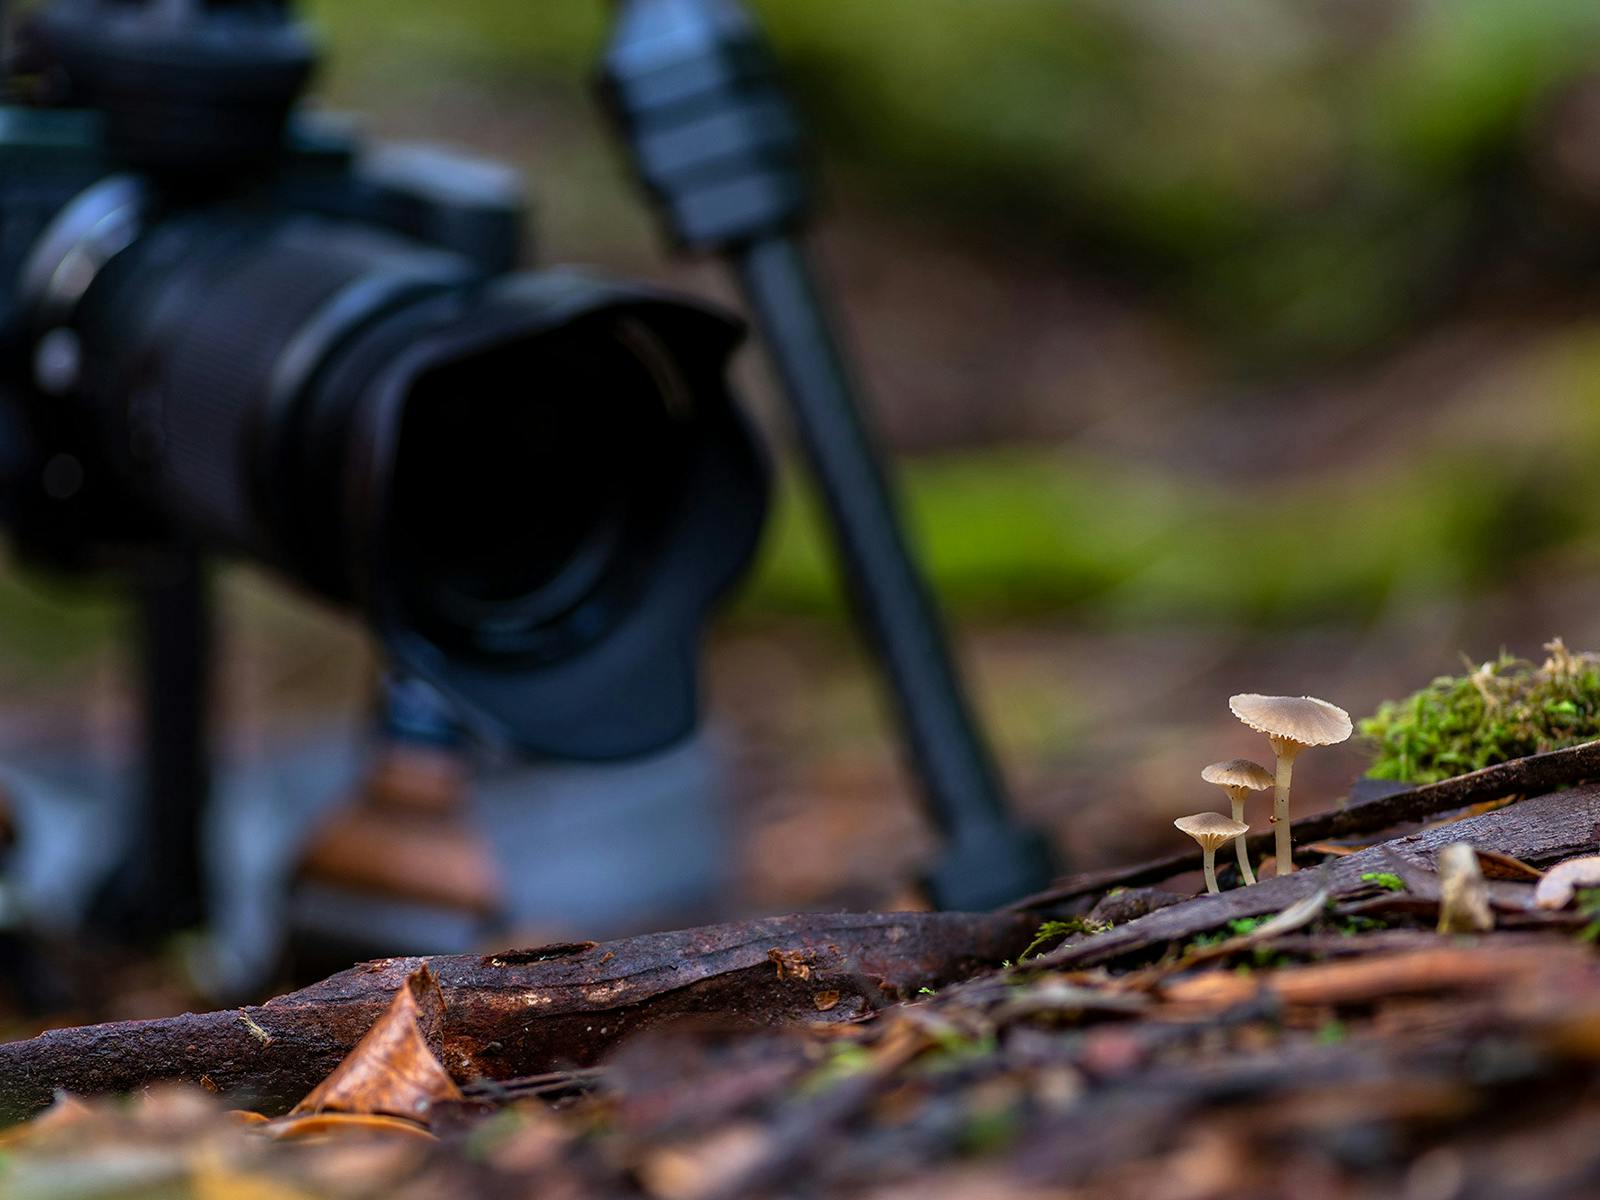 Fantastic fungi is a highlight of Mt Field & Styx Valley photography tour, particularly in autumn